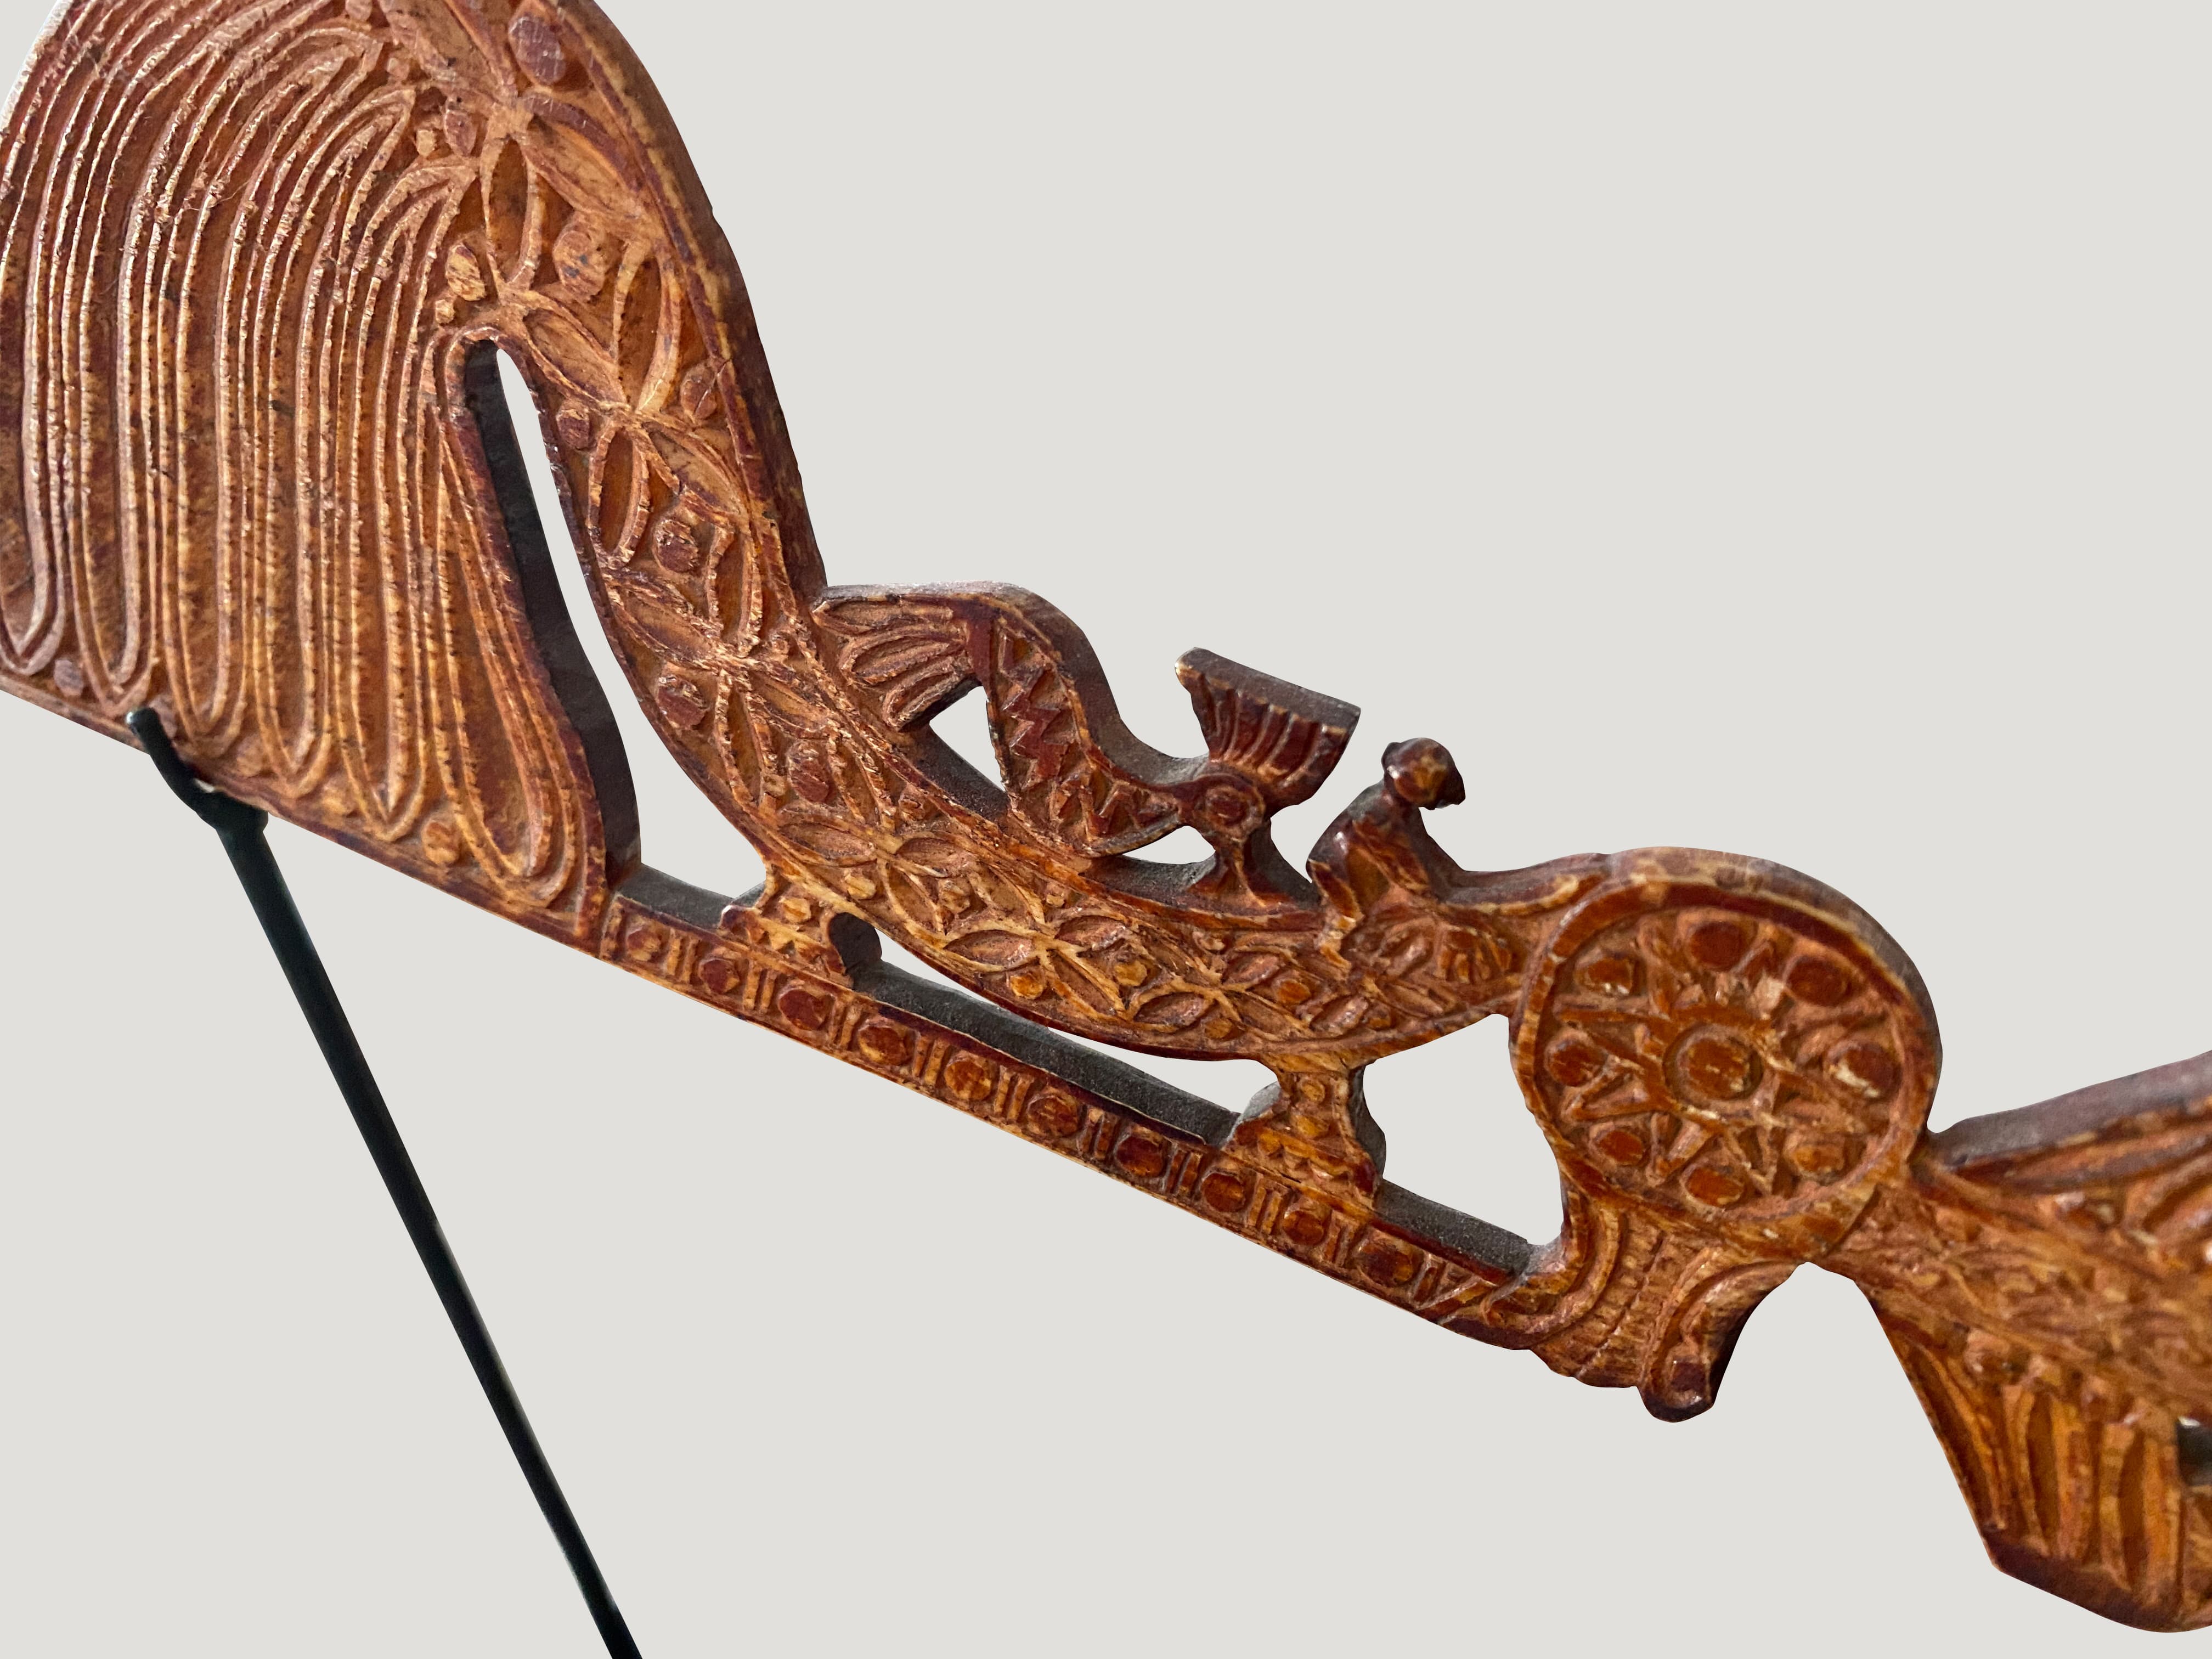 MUSEUM QUALITY HAND CARVED LADLE